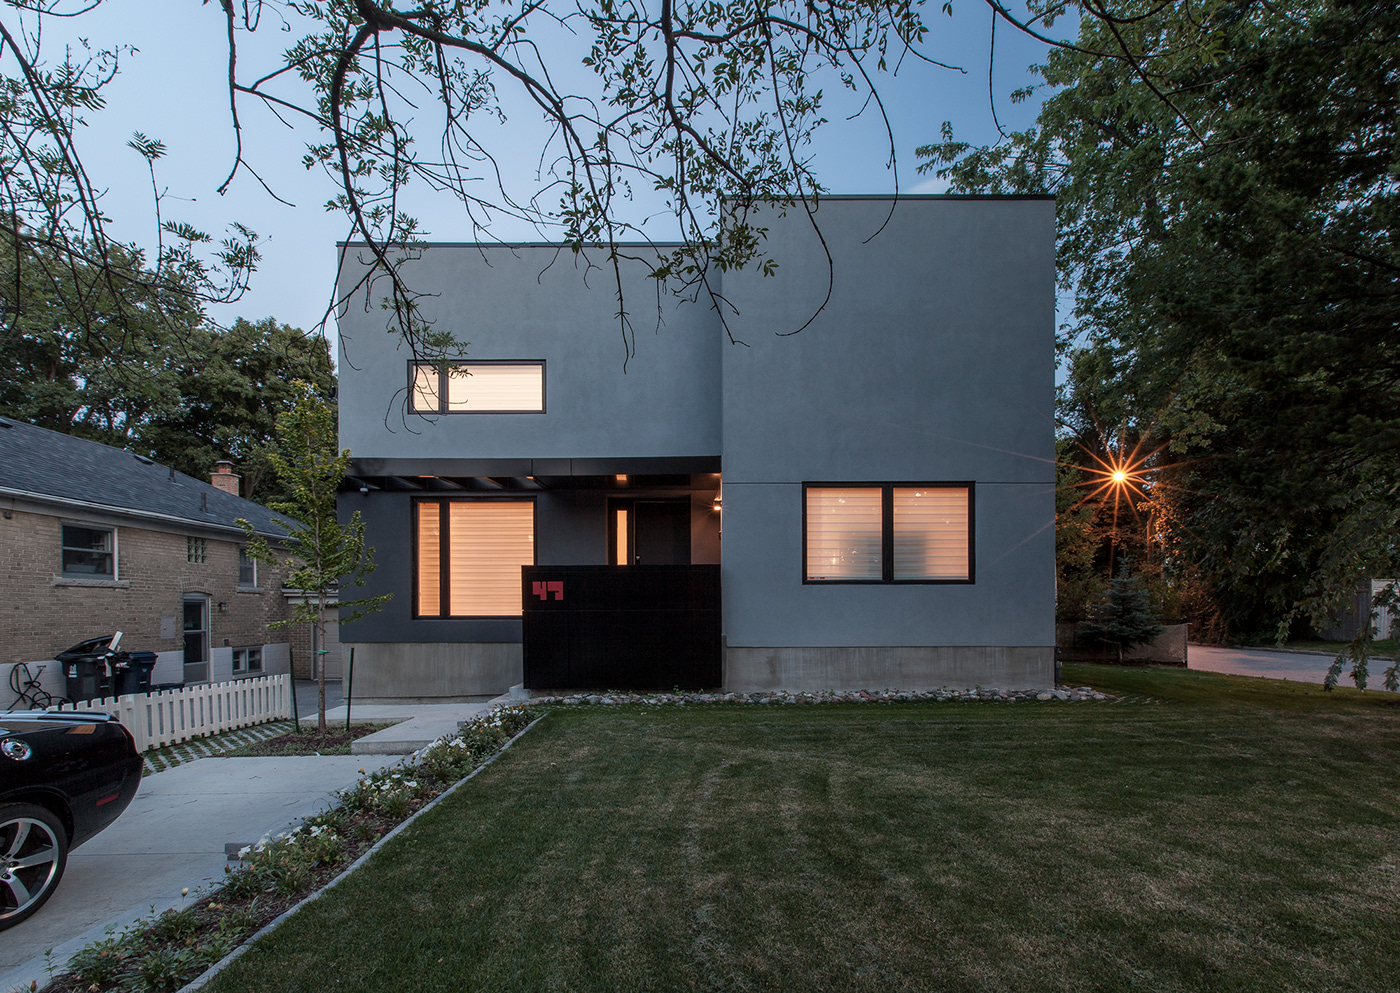 rzlbd Atelier RZLBD thorax house Infill Toronto North York